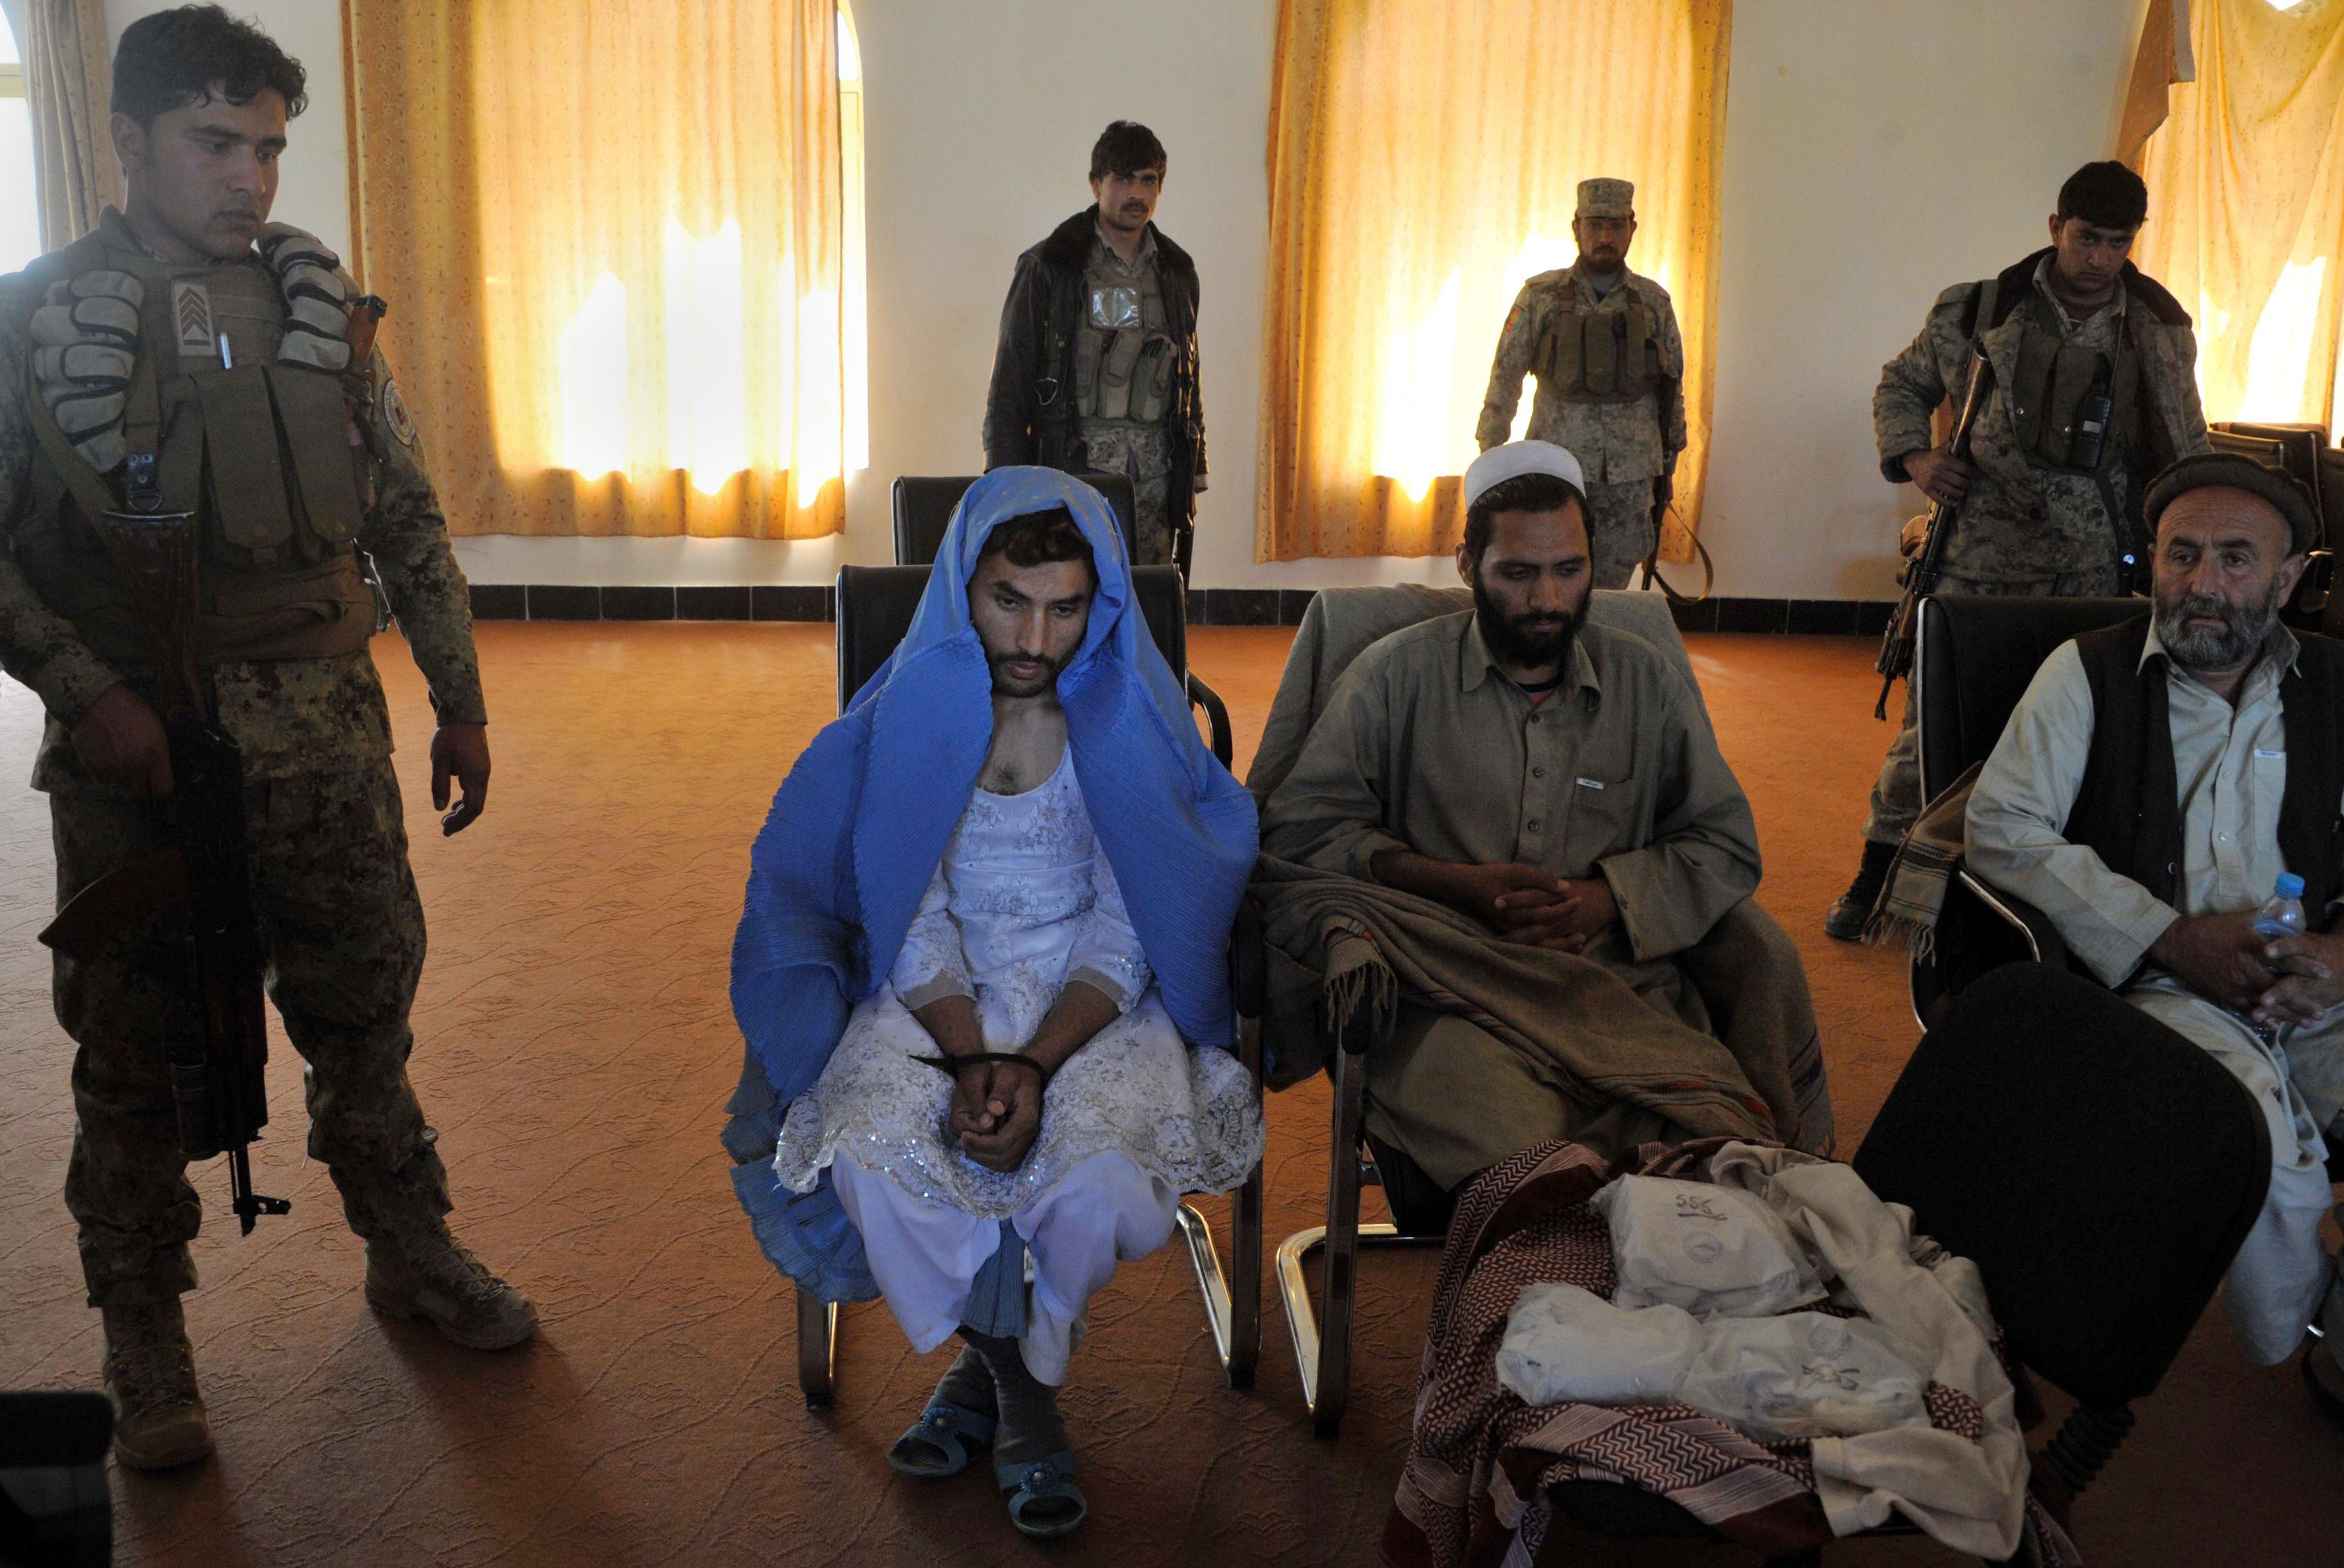 Mar. 18,2014. Afghan security personnel present a burqa-clad resident they say is a Taliban fighter to the media at the Afghan National Army headquarters in Khogyani District near Jalalabad. Three Taliban insurgents have been arrested in possession of heroin by Afghan Joint Forces during an operation in the Khogyani District of Nangarhar province.